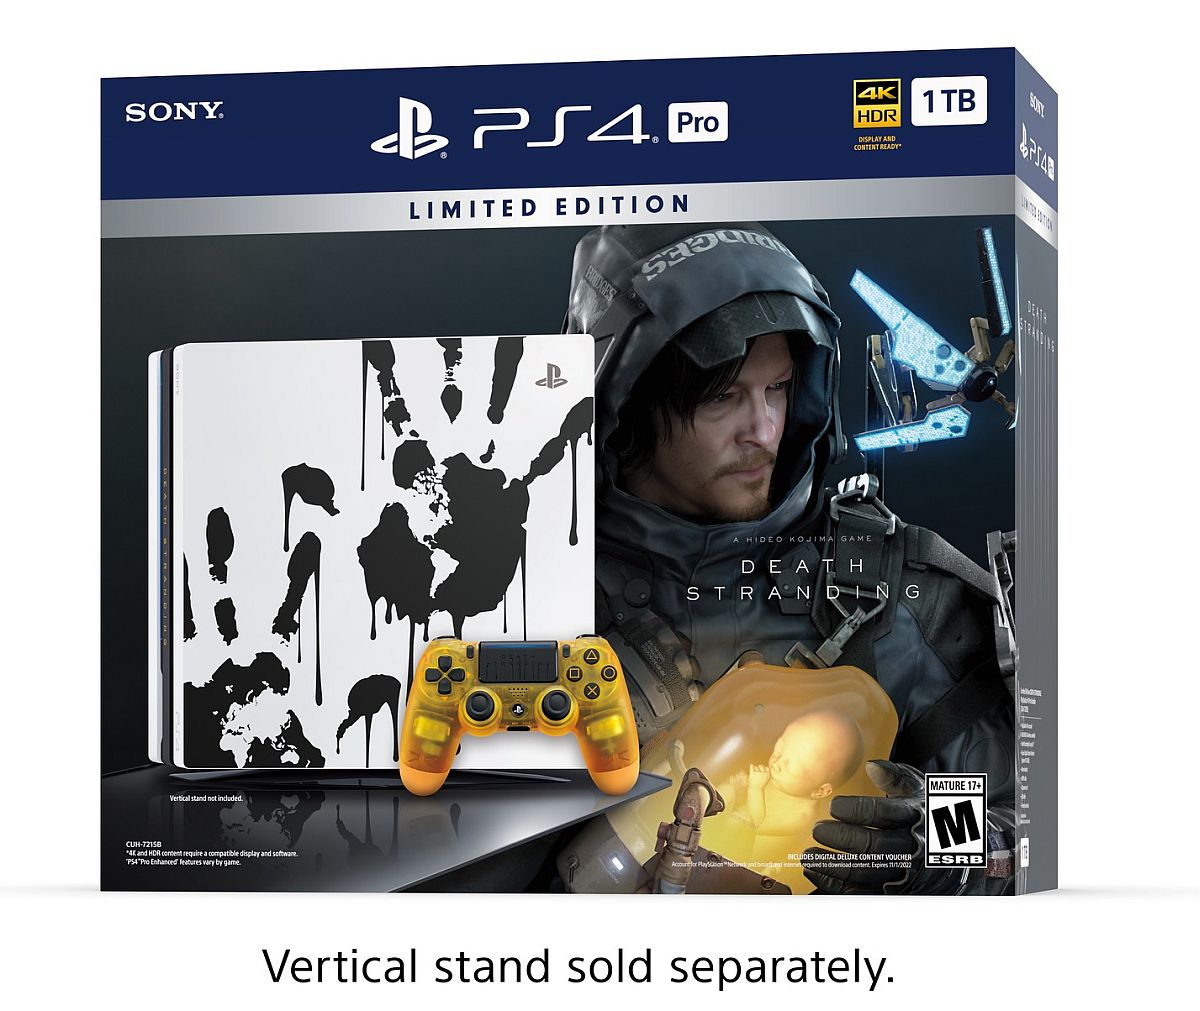 The Death Stranding Limited Edition PS4 Pro bundle looks pretty